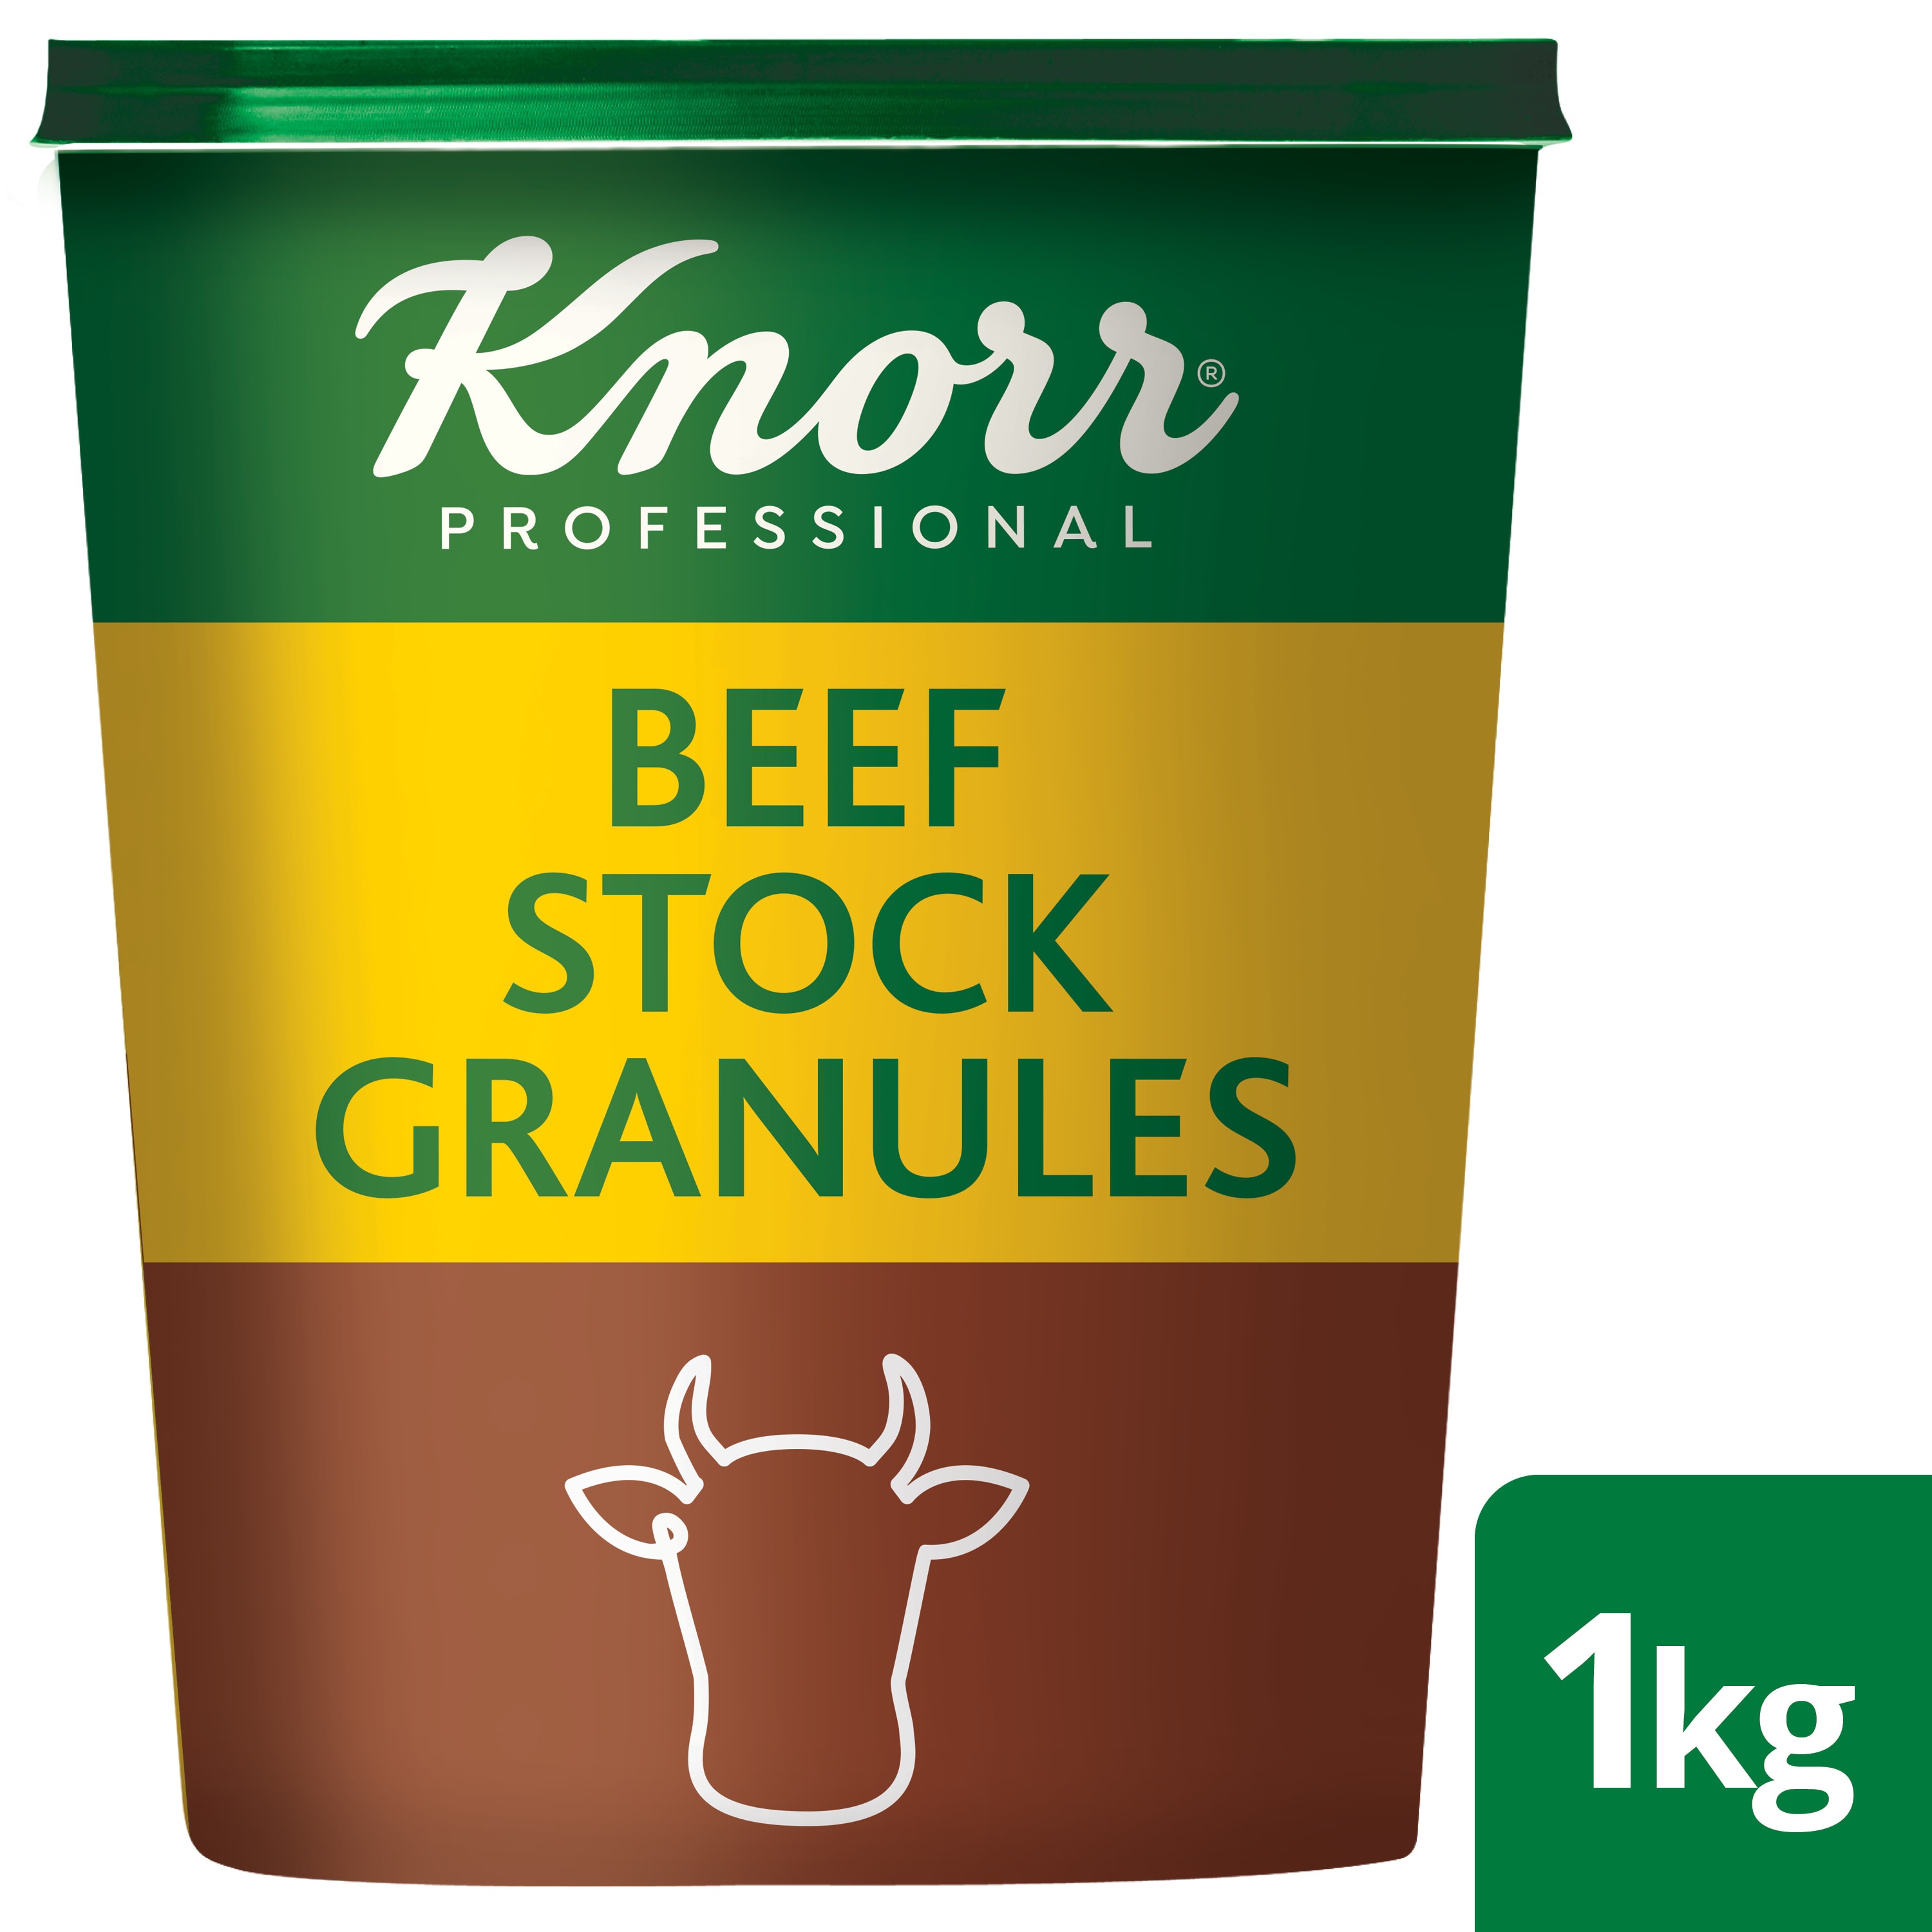 Knorr Professional Beef Stock Granules - 